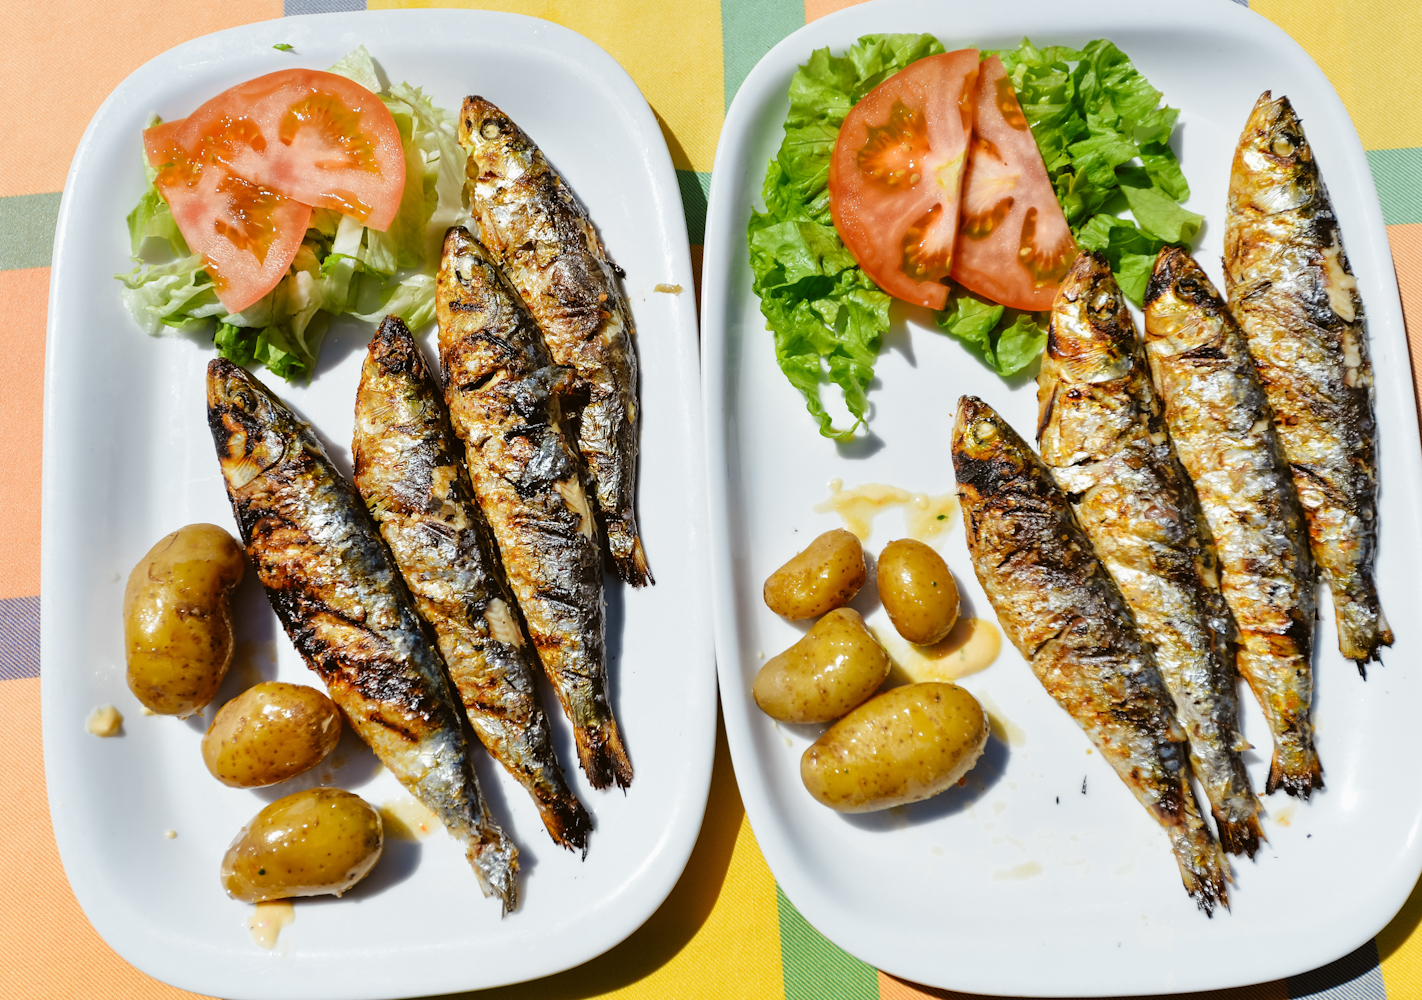 Looking for a healthier meal option? Then don't miss these grilled sardines!